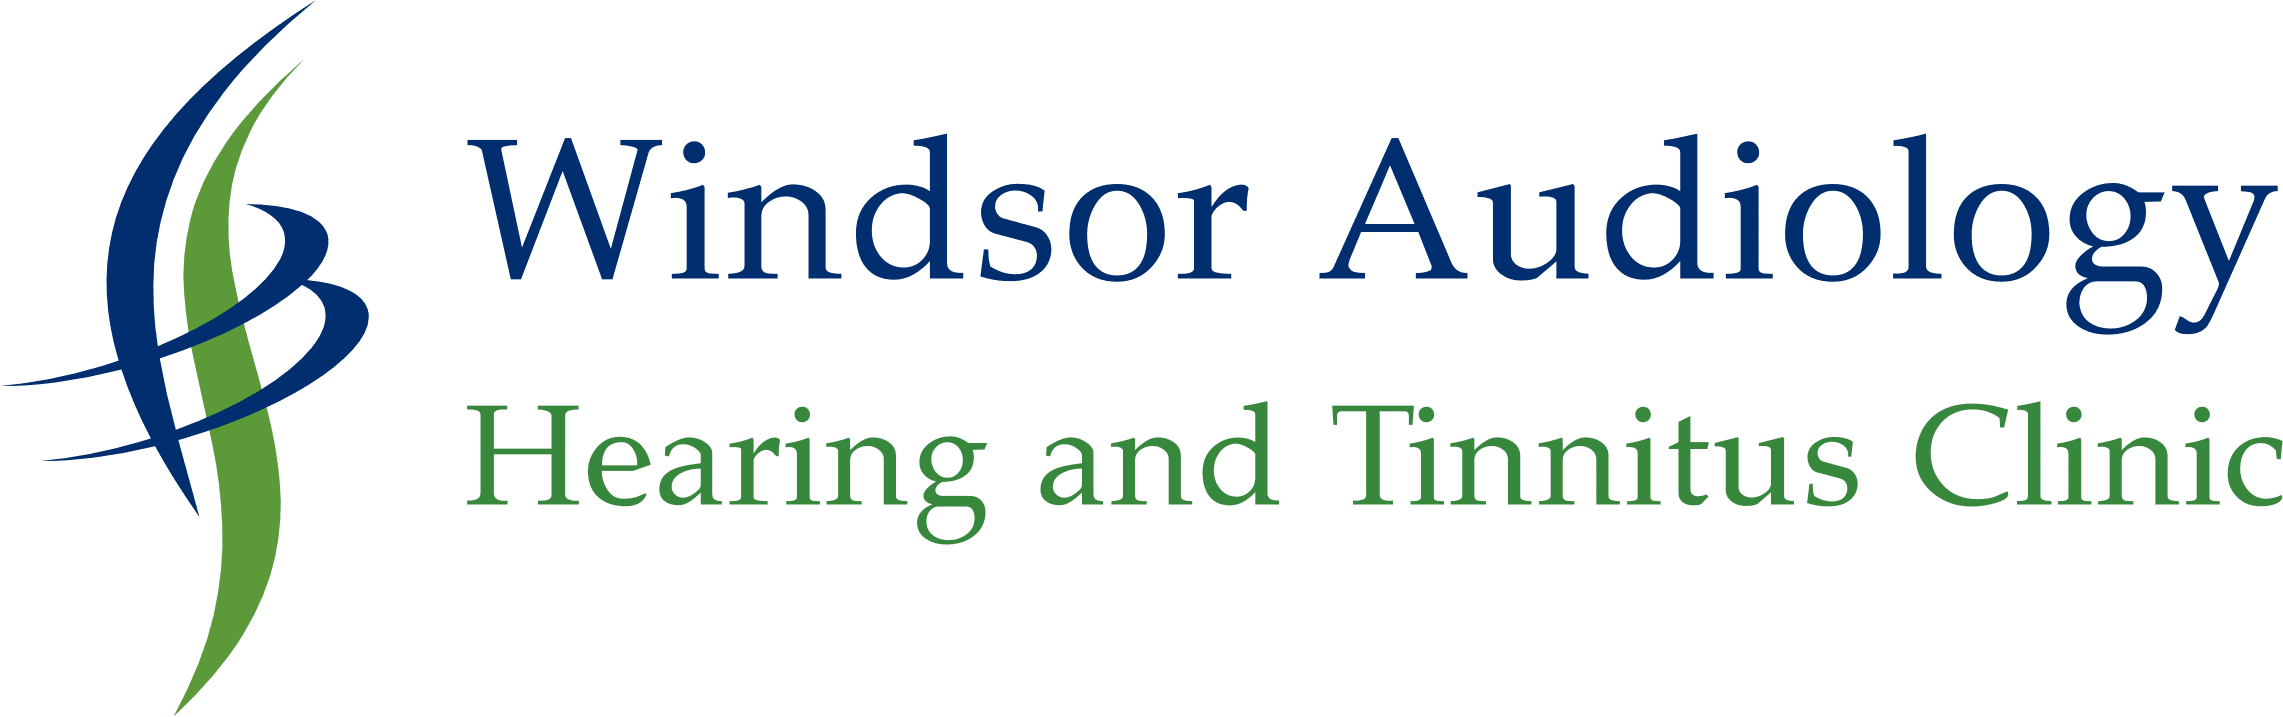 Windsor Audiology Hearing and Tinnitus Clinic